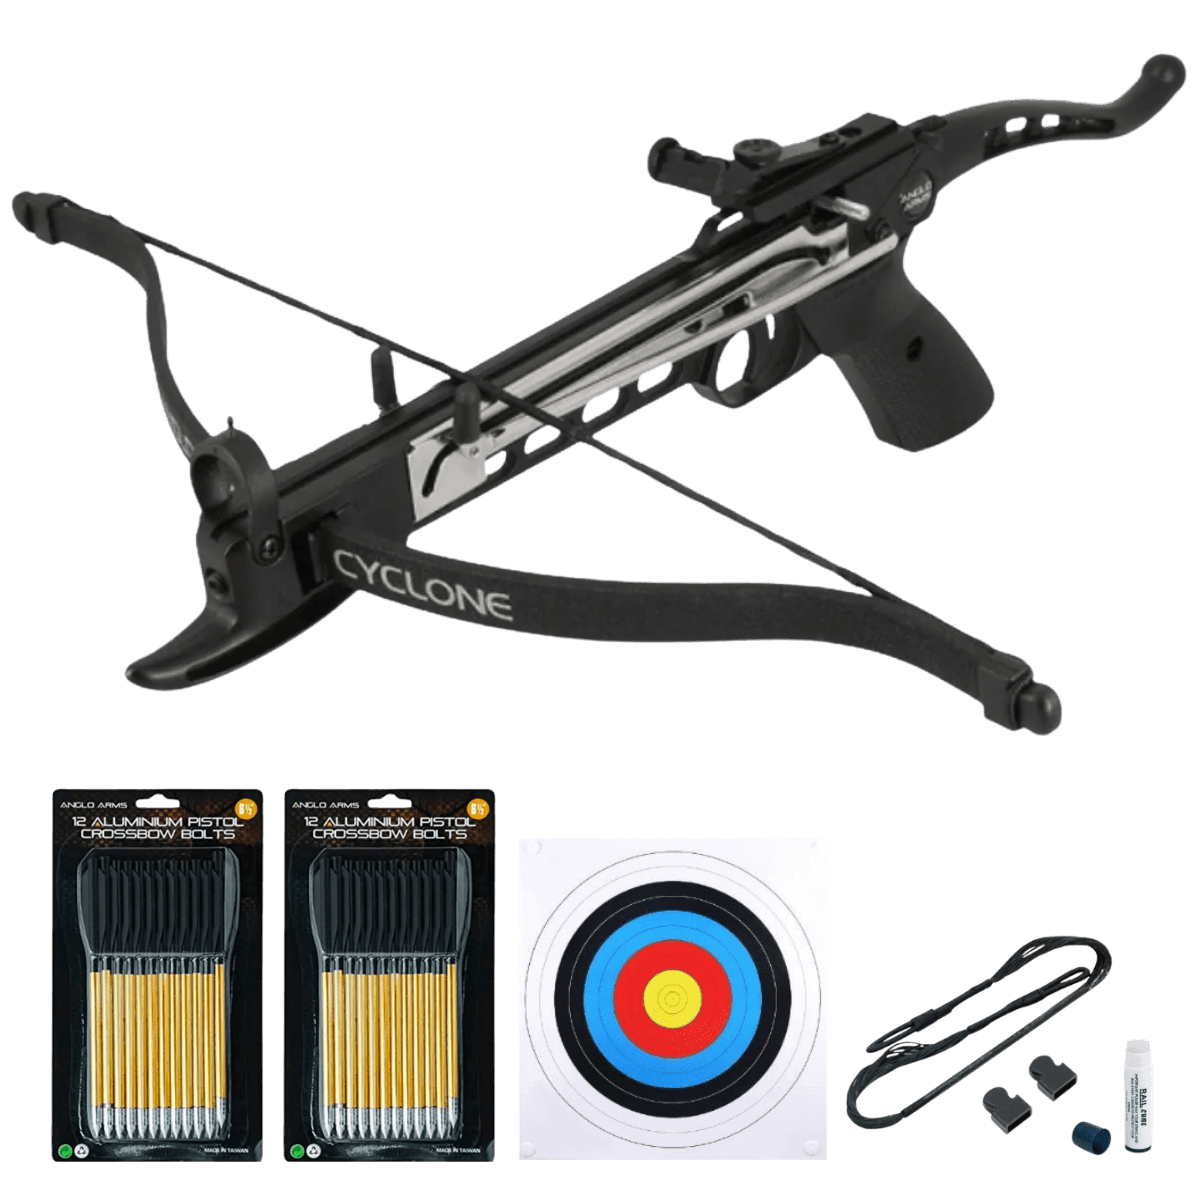 Anglo Arms Cyclone 80lbs Aluminium Pistol Crossbow Bundle - Fast UK Shipping | Tactical Archery UK